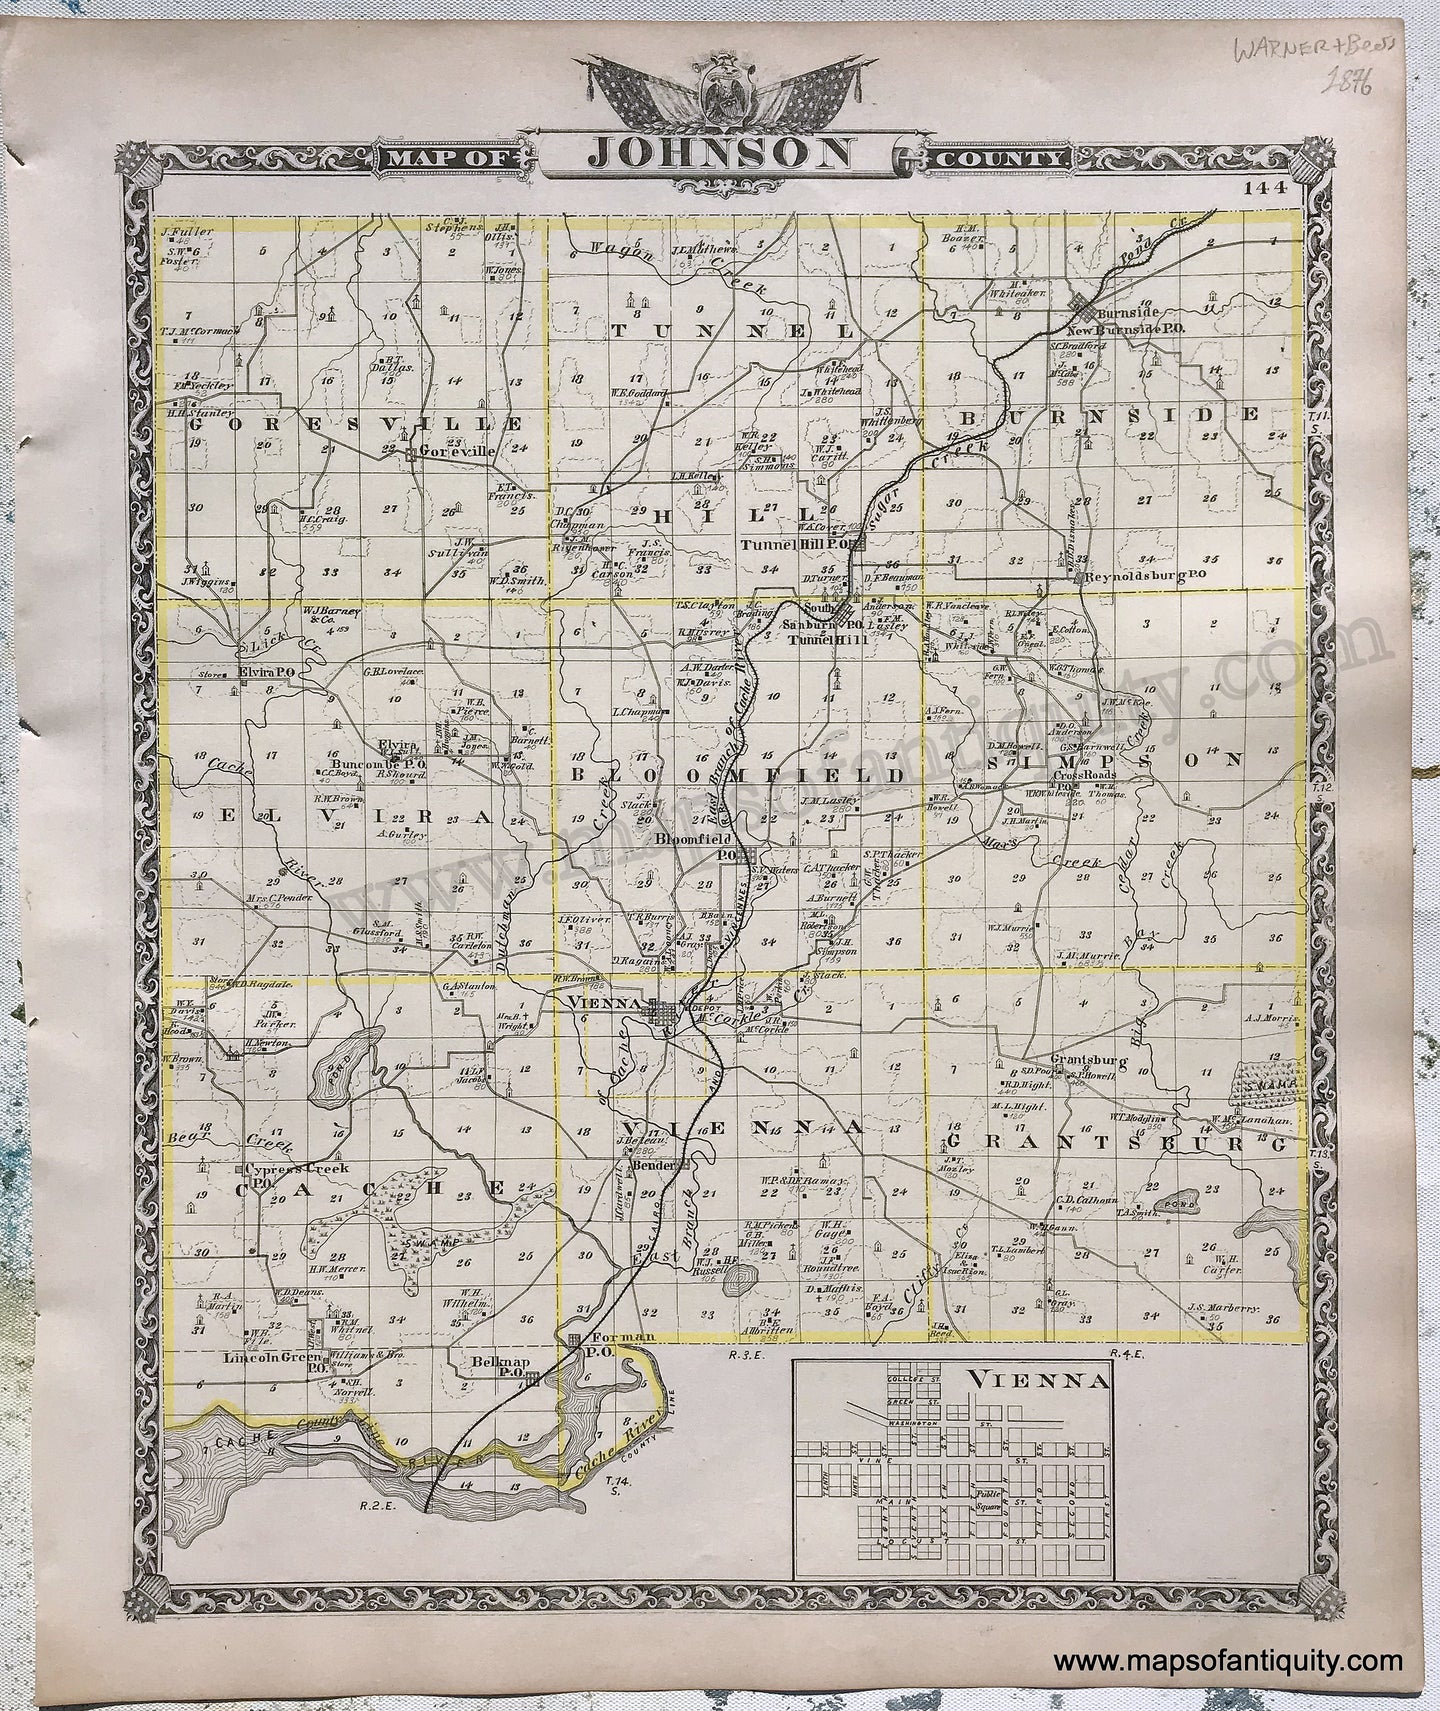 Antique-Hand-Colored-Map-Johnson-County-Illinois;-verso:-Pope-&-Massac-Counties-Illinois-1876-Warner-&-Beers-/-Union-Atlas-Co.-Midwest-1800s-19th-century-Maps-of-Antiquity